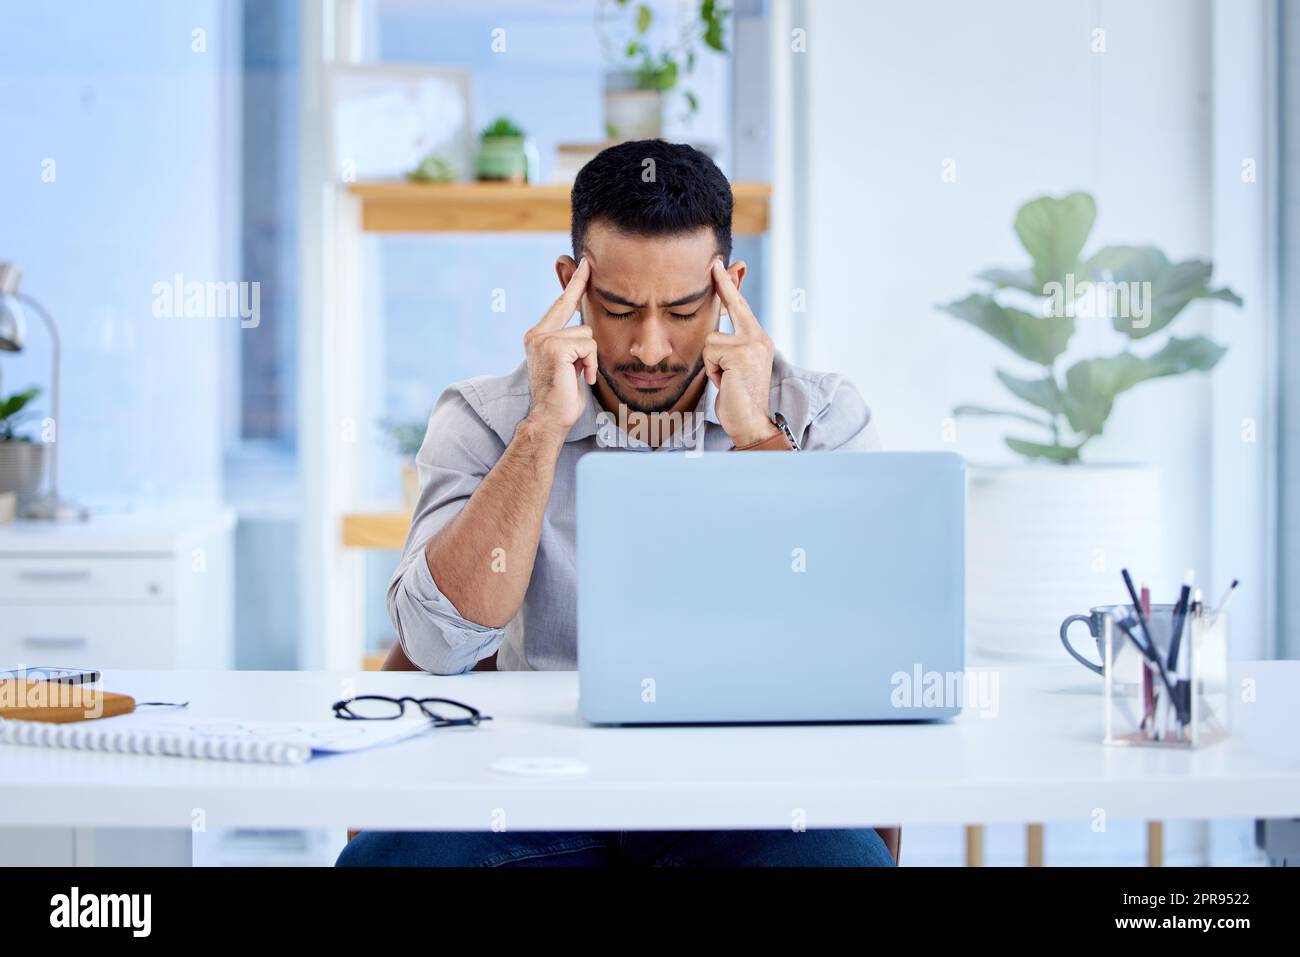 Burdened by many looming deadlines. a young businessman looking stressed out while working on a laptop in an office. Stock Photo